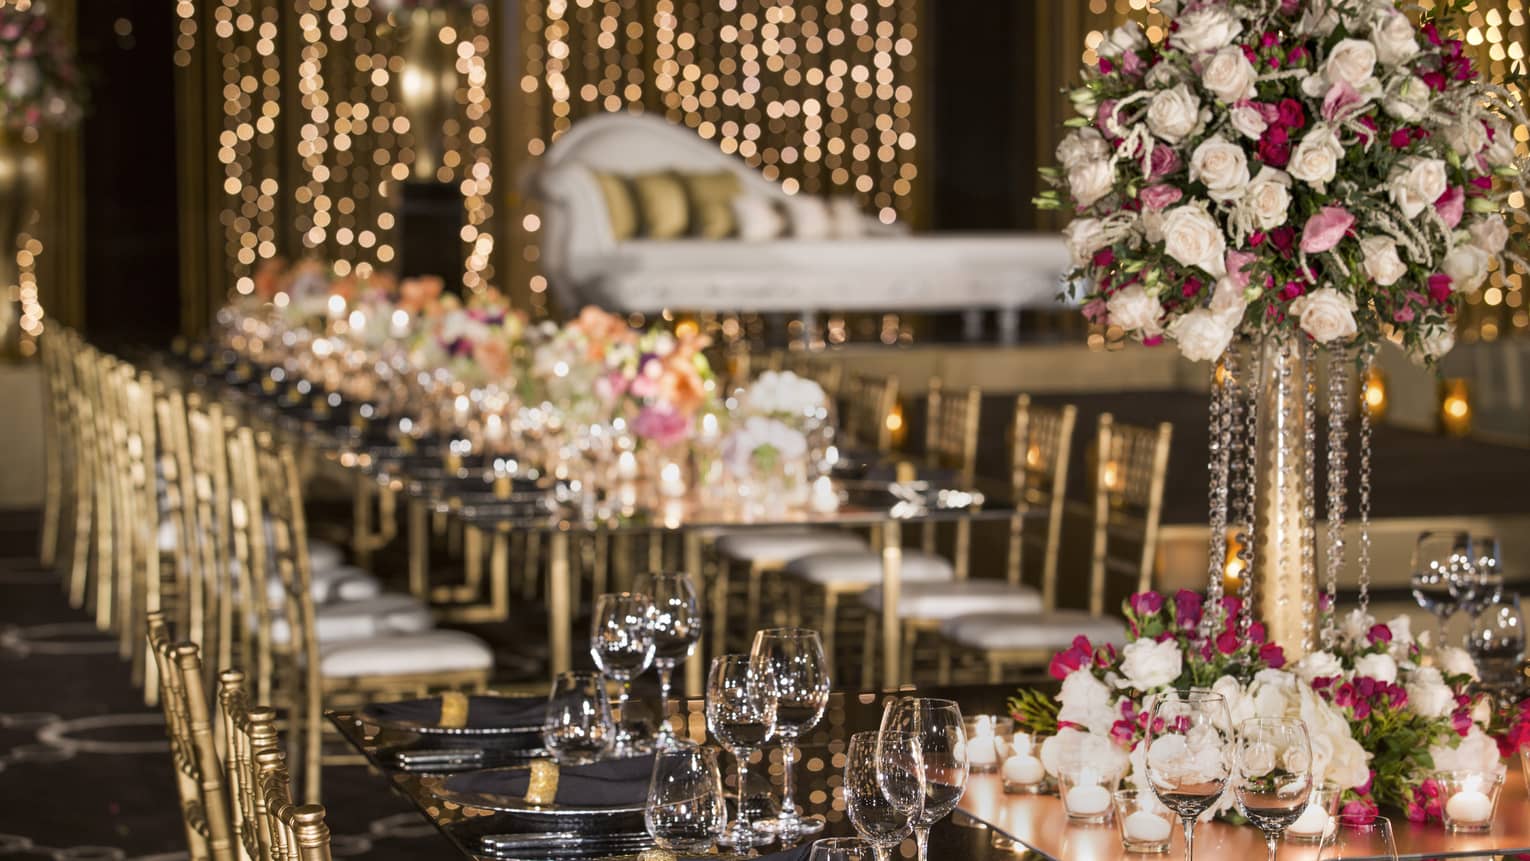 Wine glasses, roses on wedding banquet table before elegant chaise lounge chair 